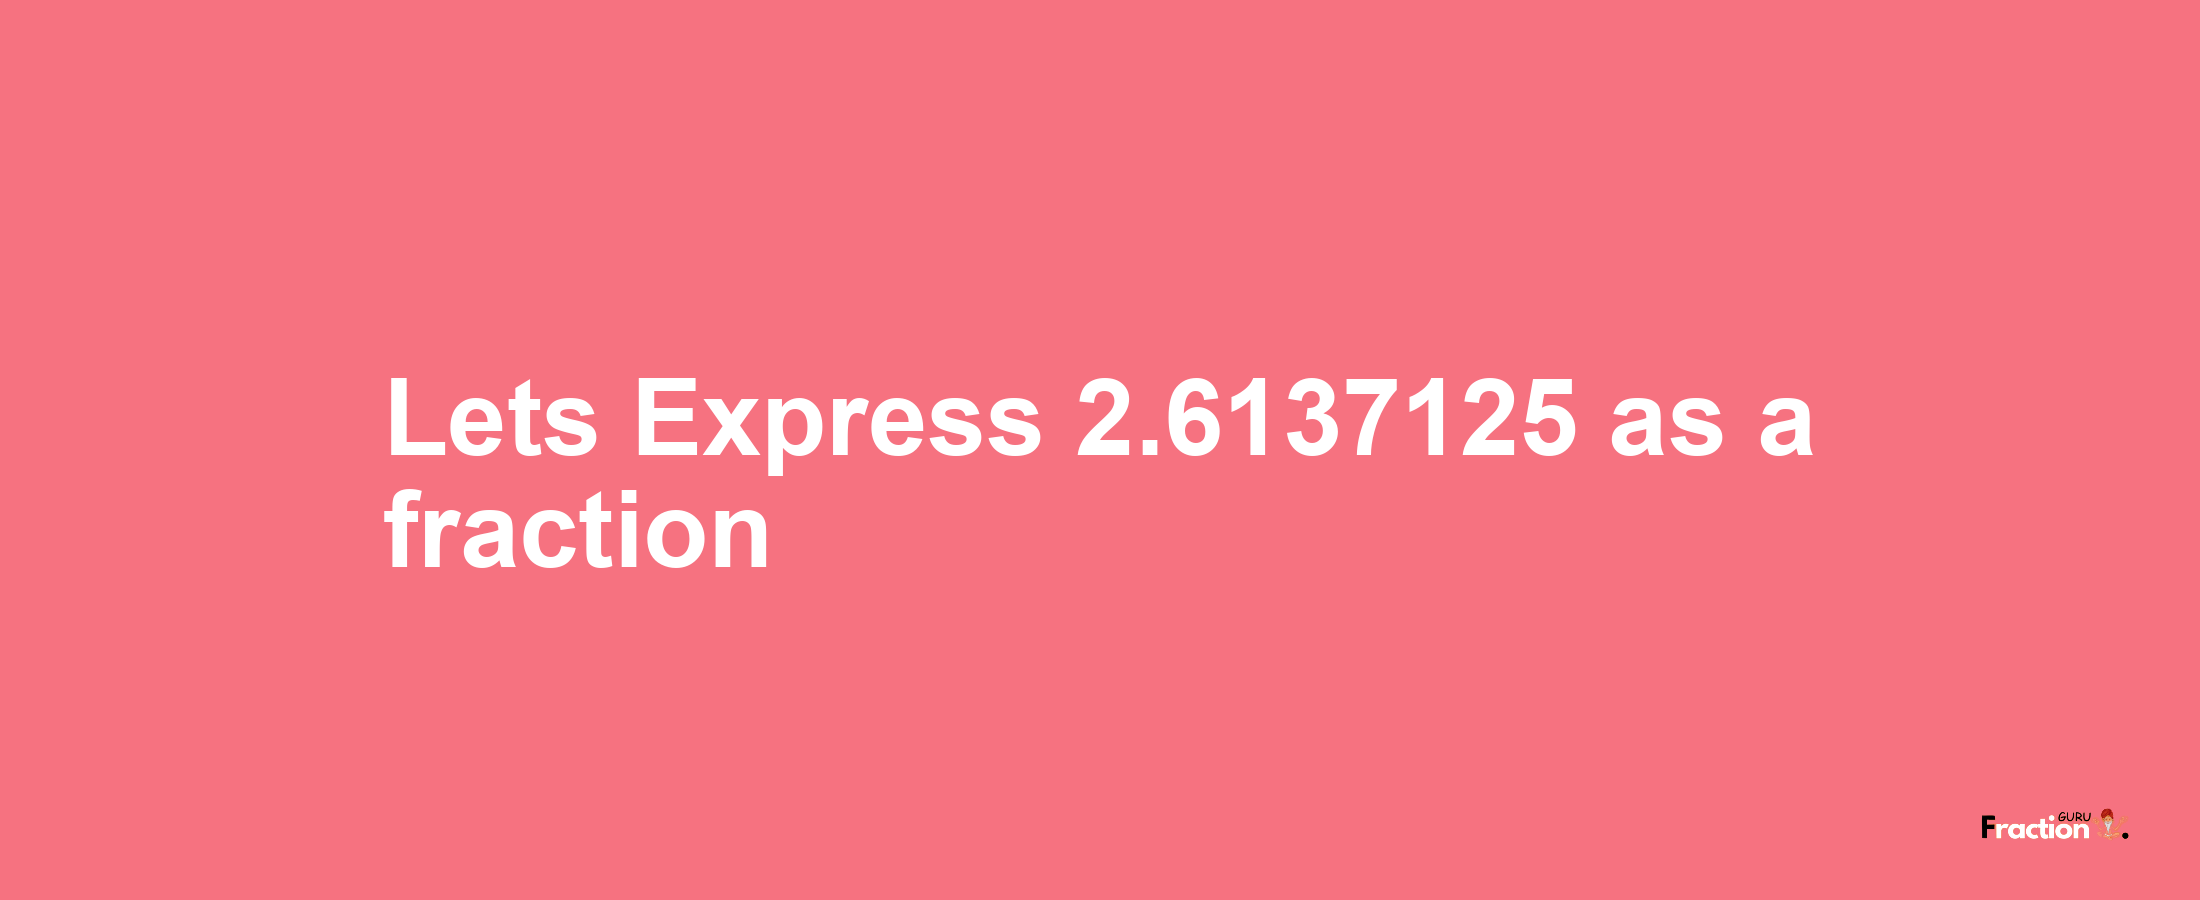 Lets Express 2.6137125 as afraction